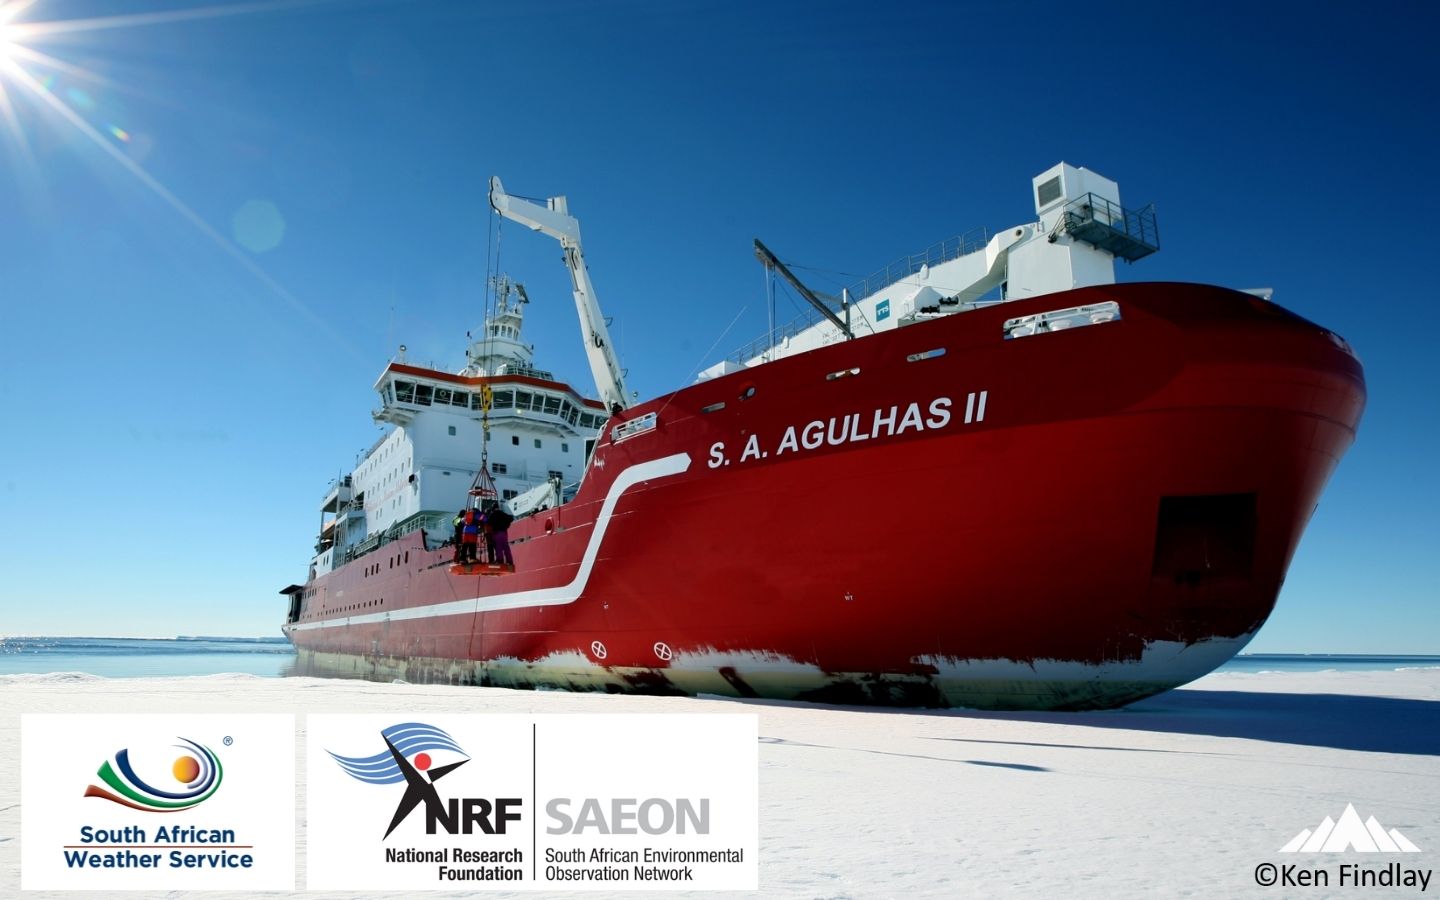 LIVE interview from the S.A. Agulhas II – SAWS Marine Scientists currently on the Endurance 22 Expedition